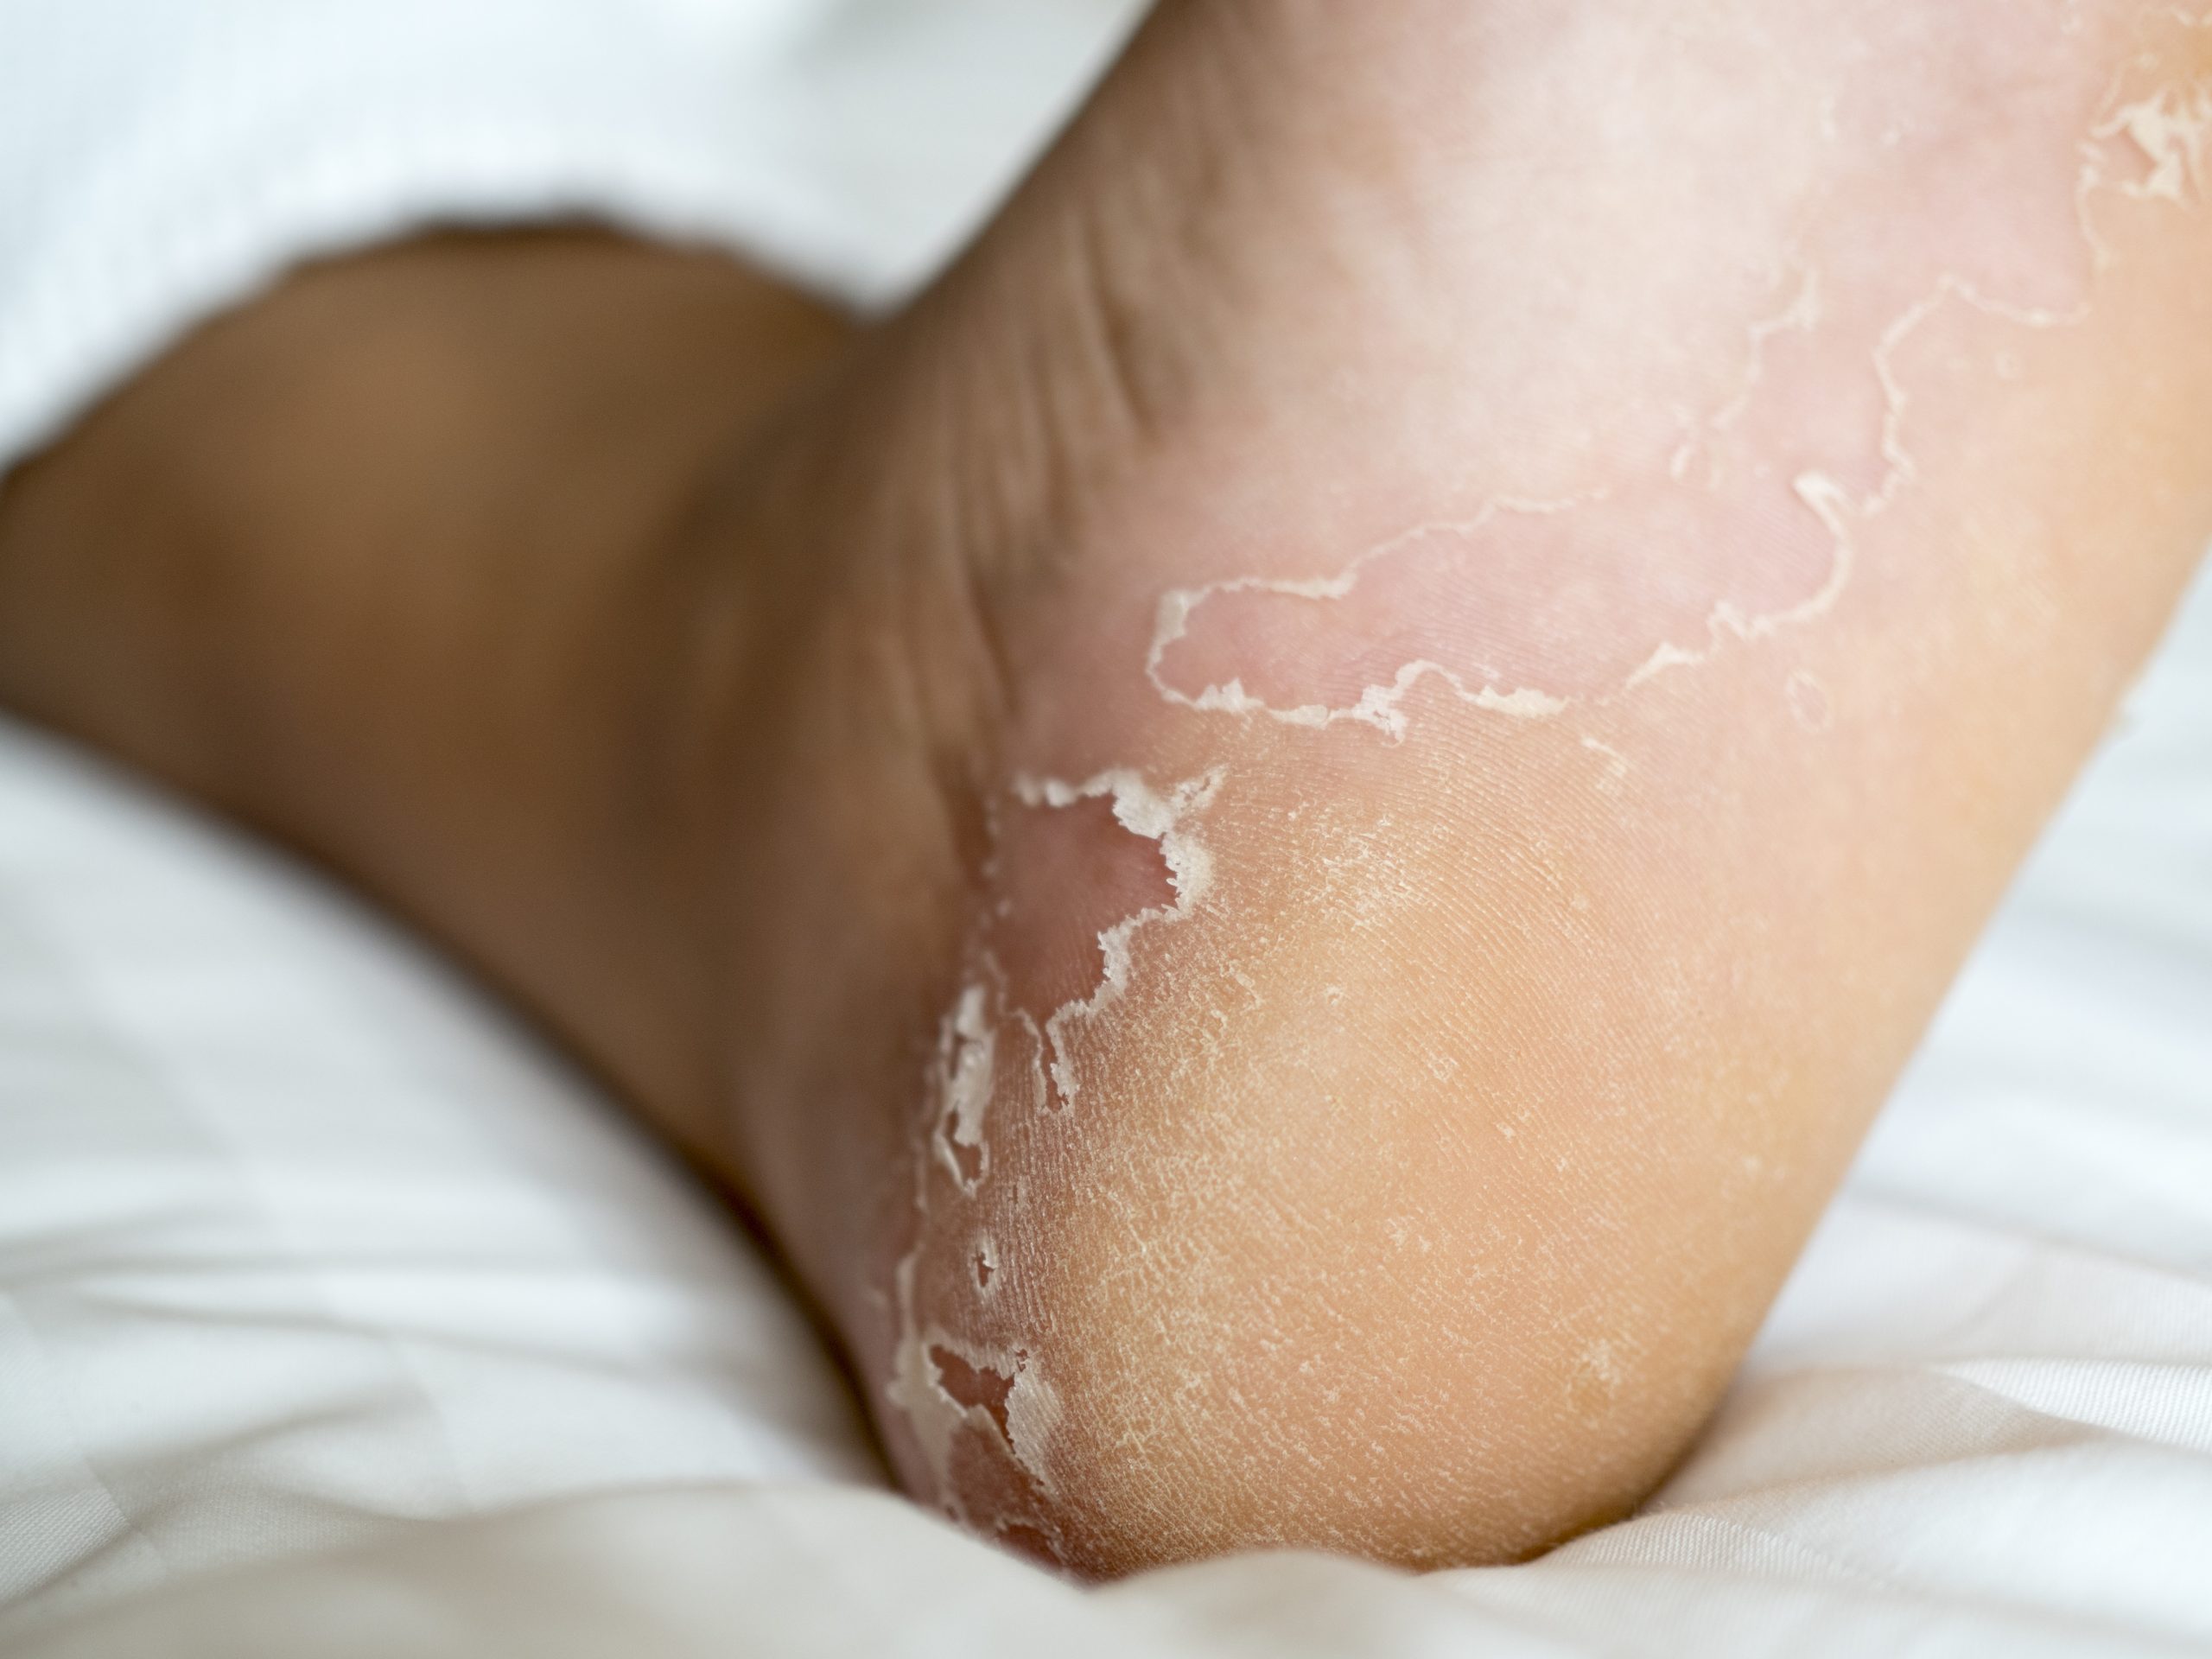 Burning feet can be a symptom of high uric acid | The Times of India